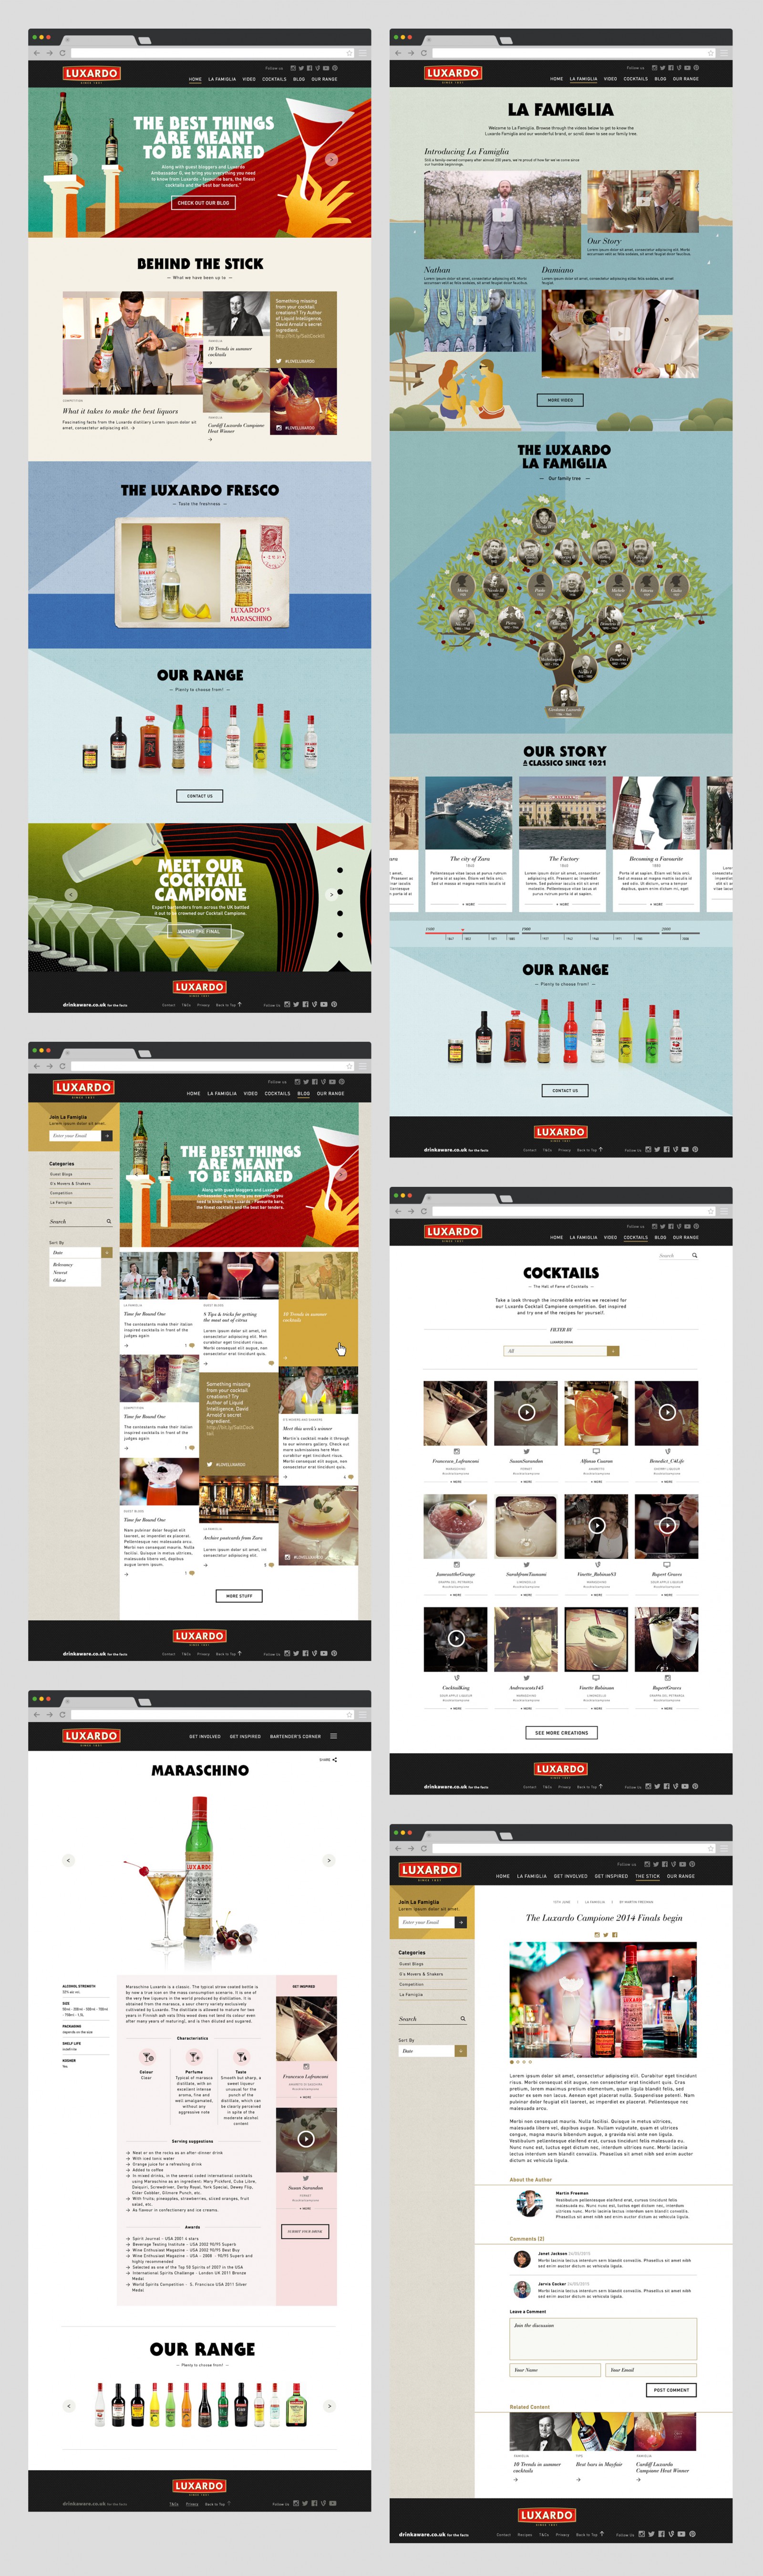 Luxardo Cocktails Design Refresh - Secondary Full Width Image